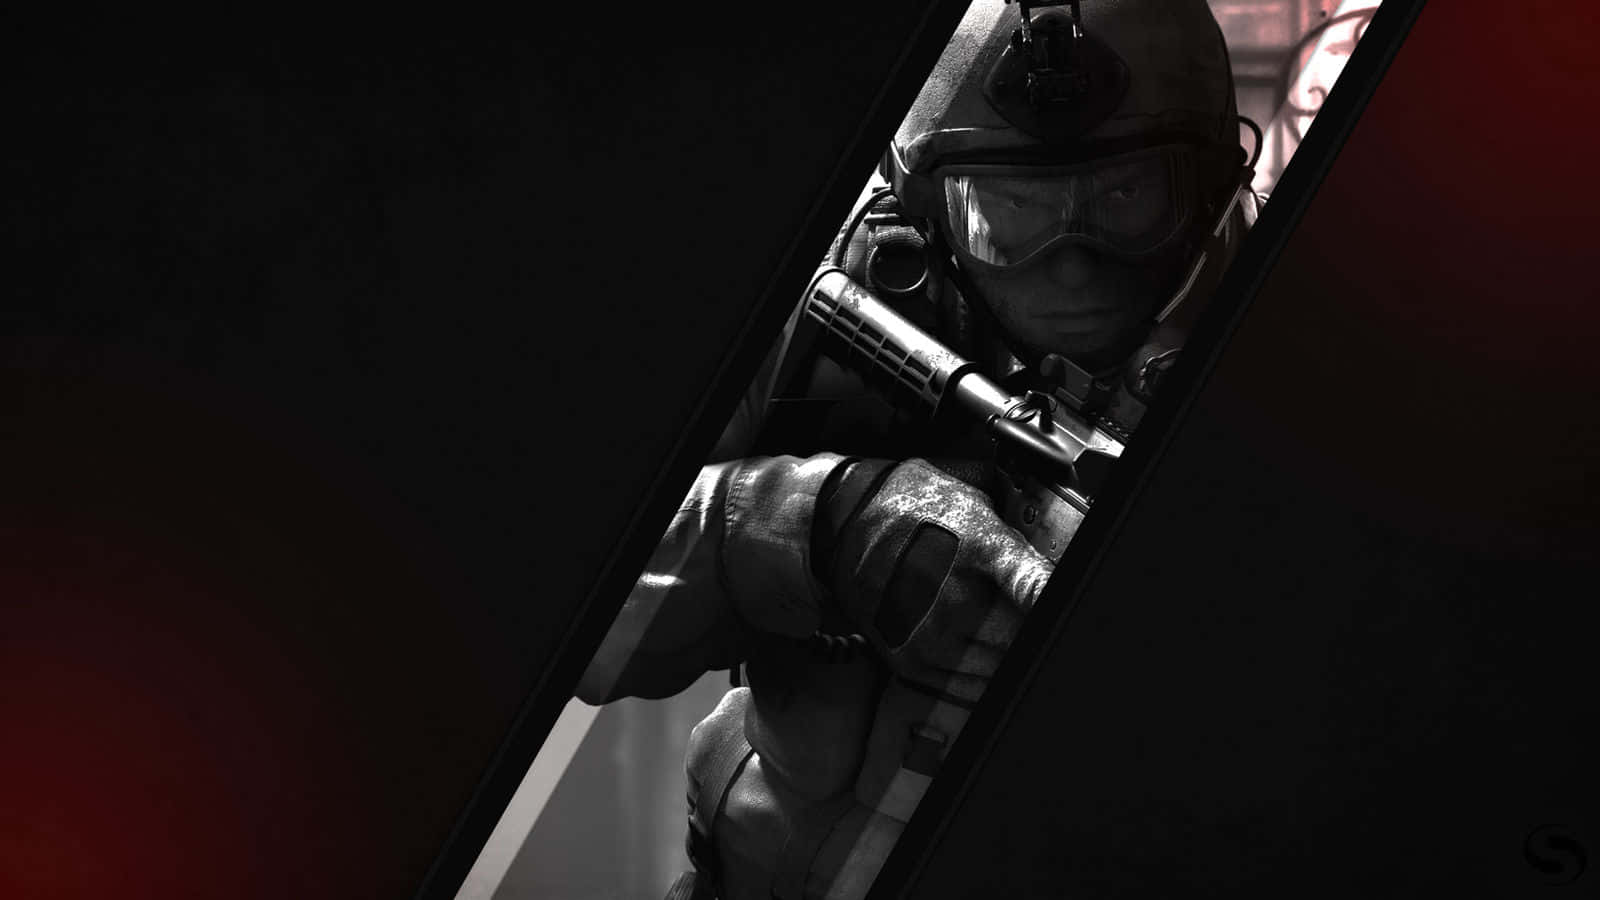 Sniper Counter Strike Global Offensive Background 1600 x 900 Background